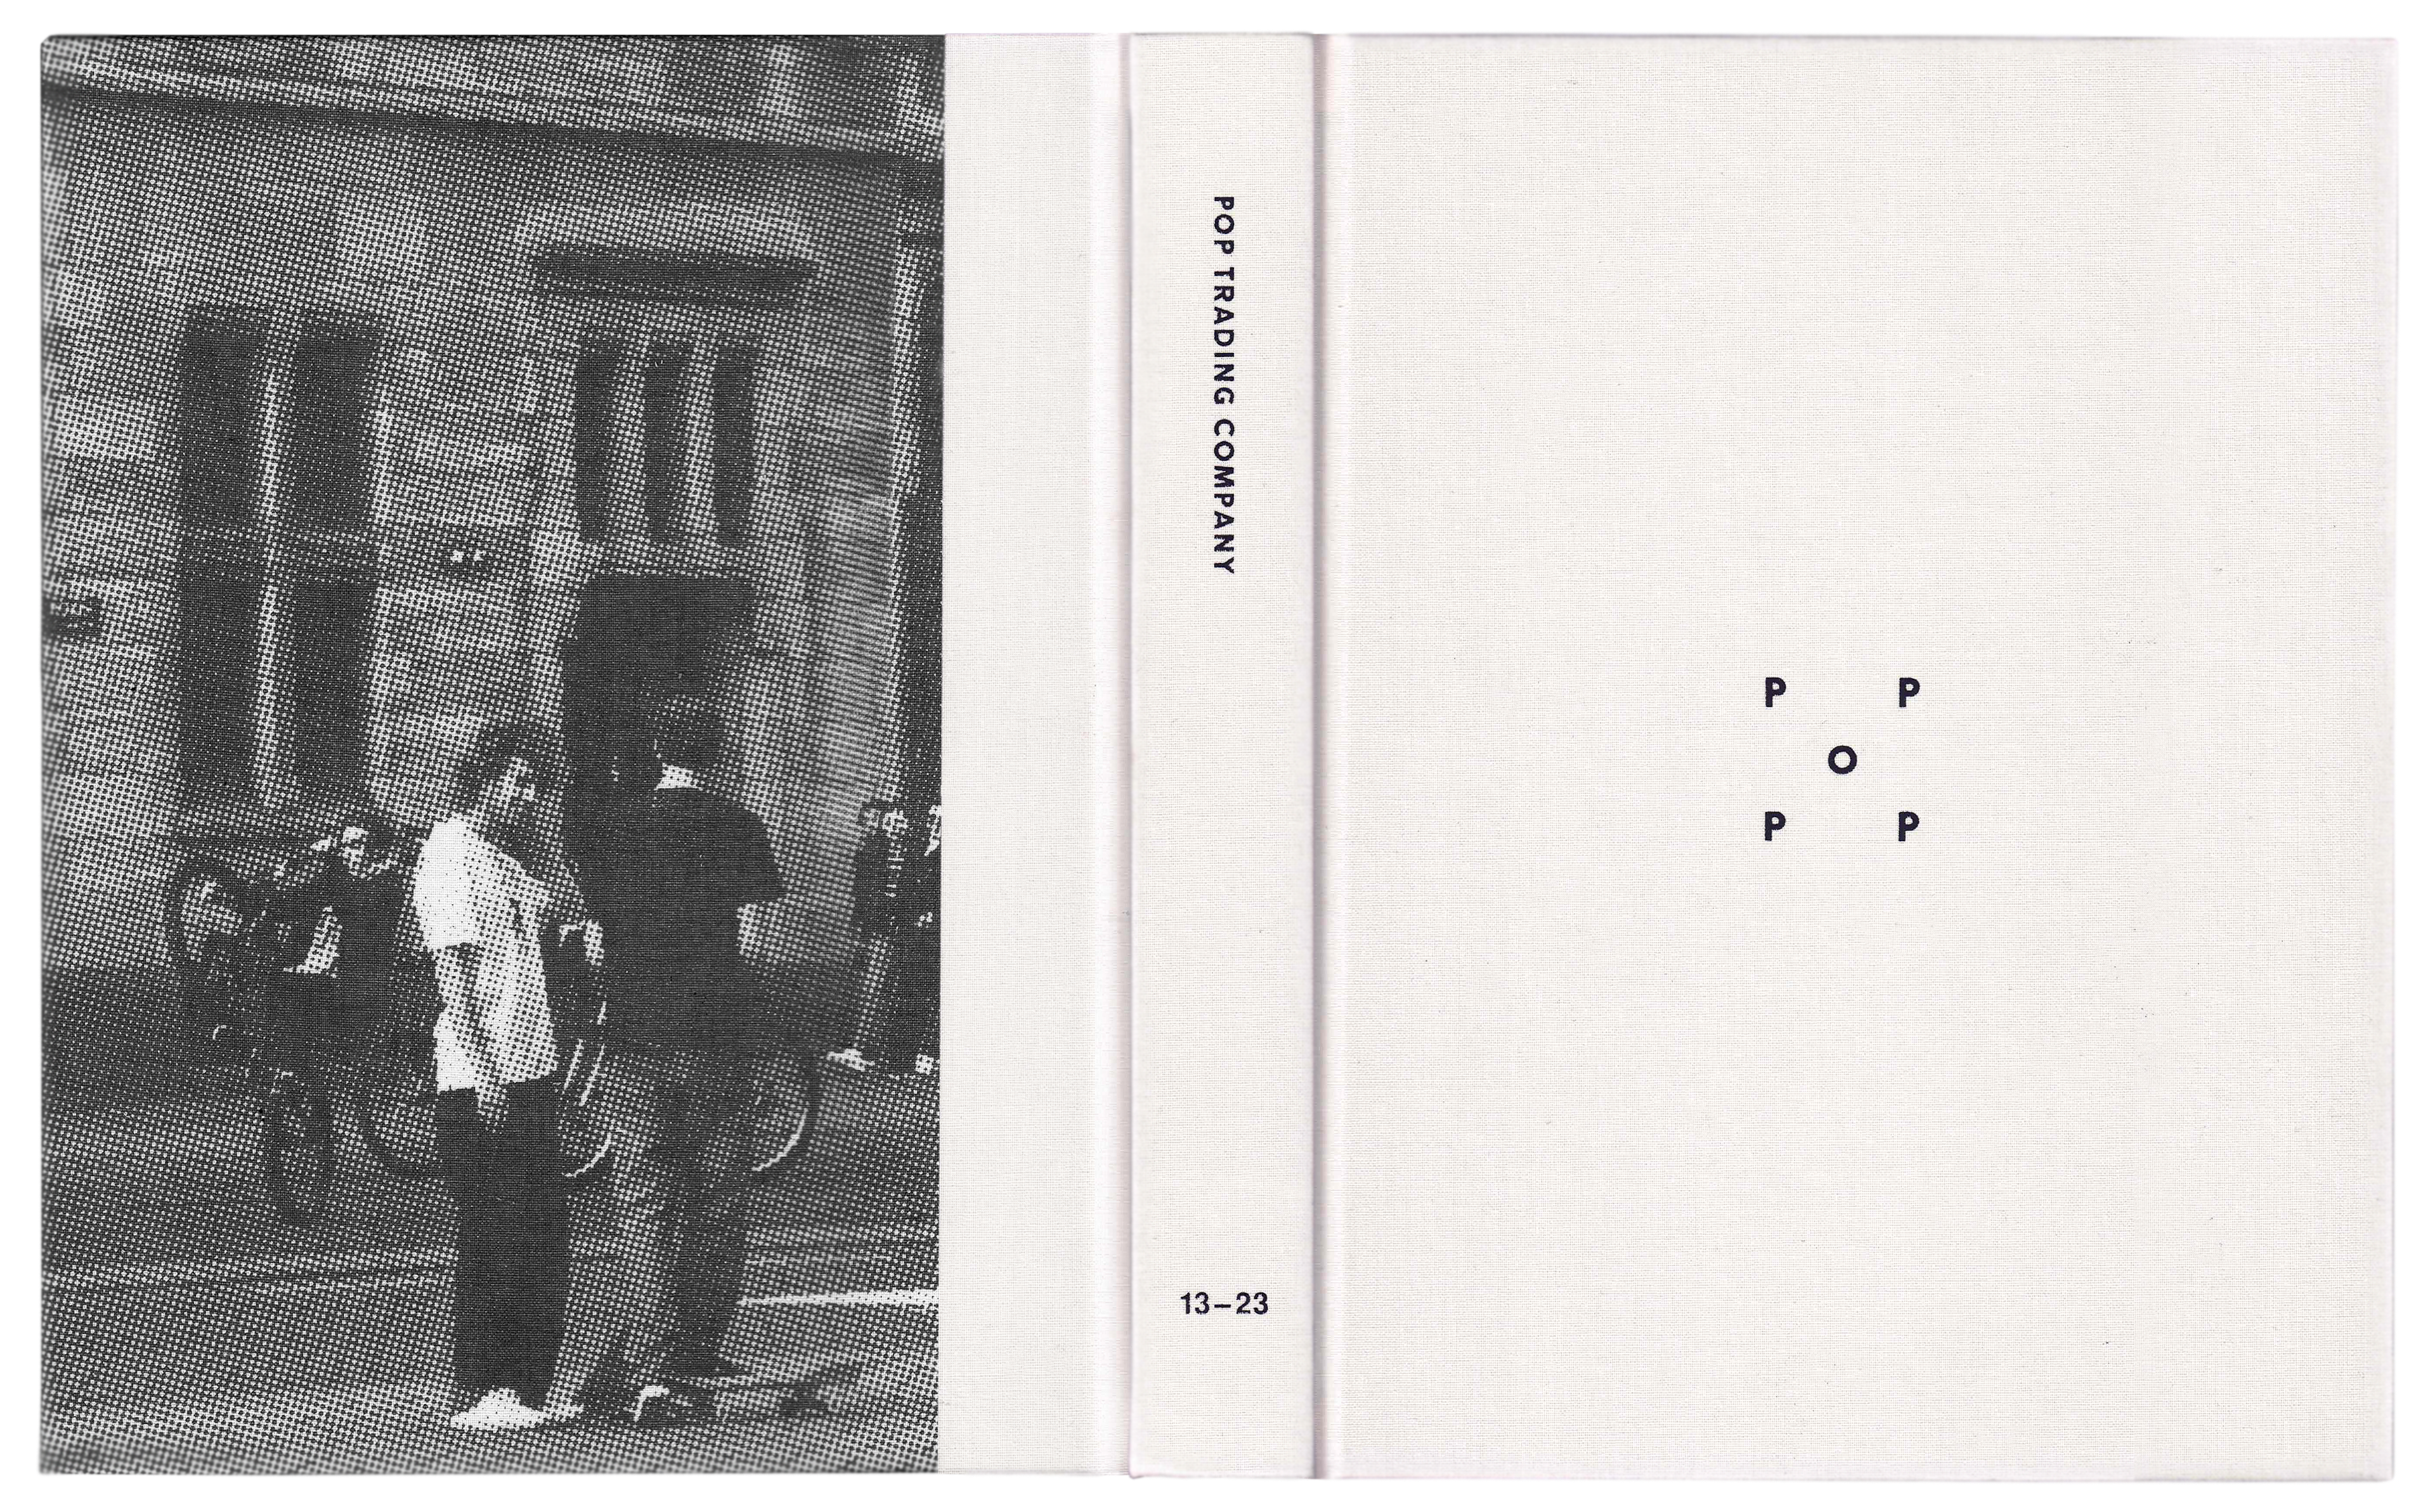 Scan of a book with a black and white image of two skaters on the street